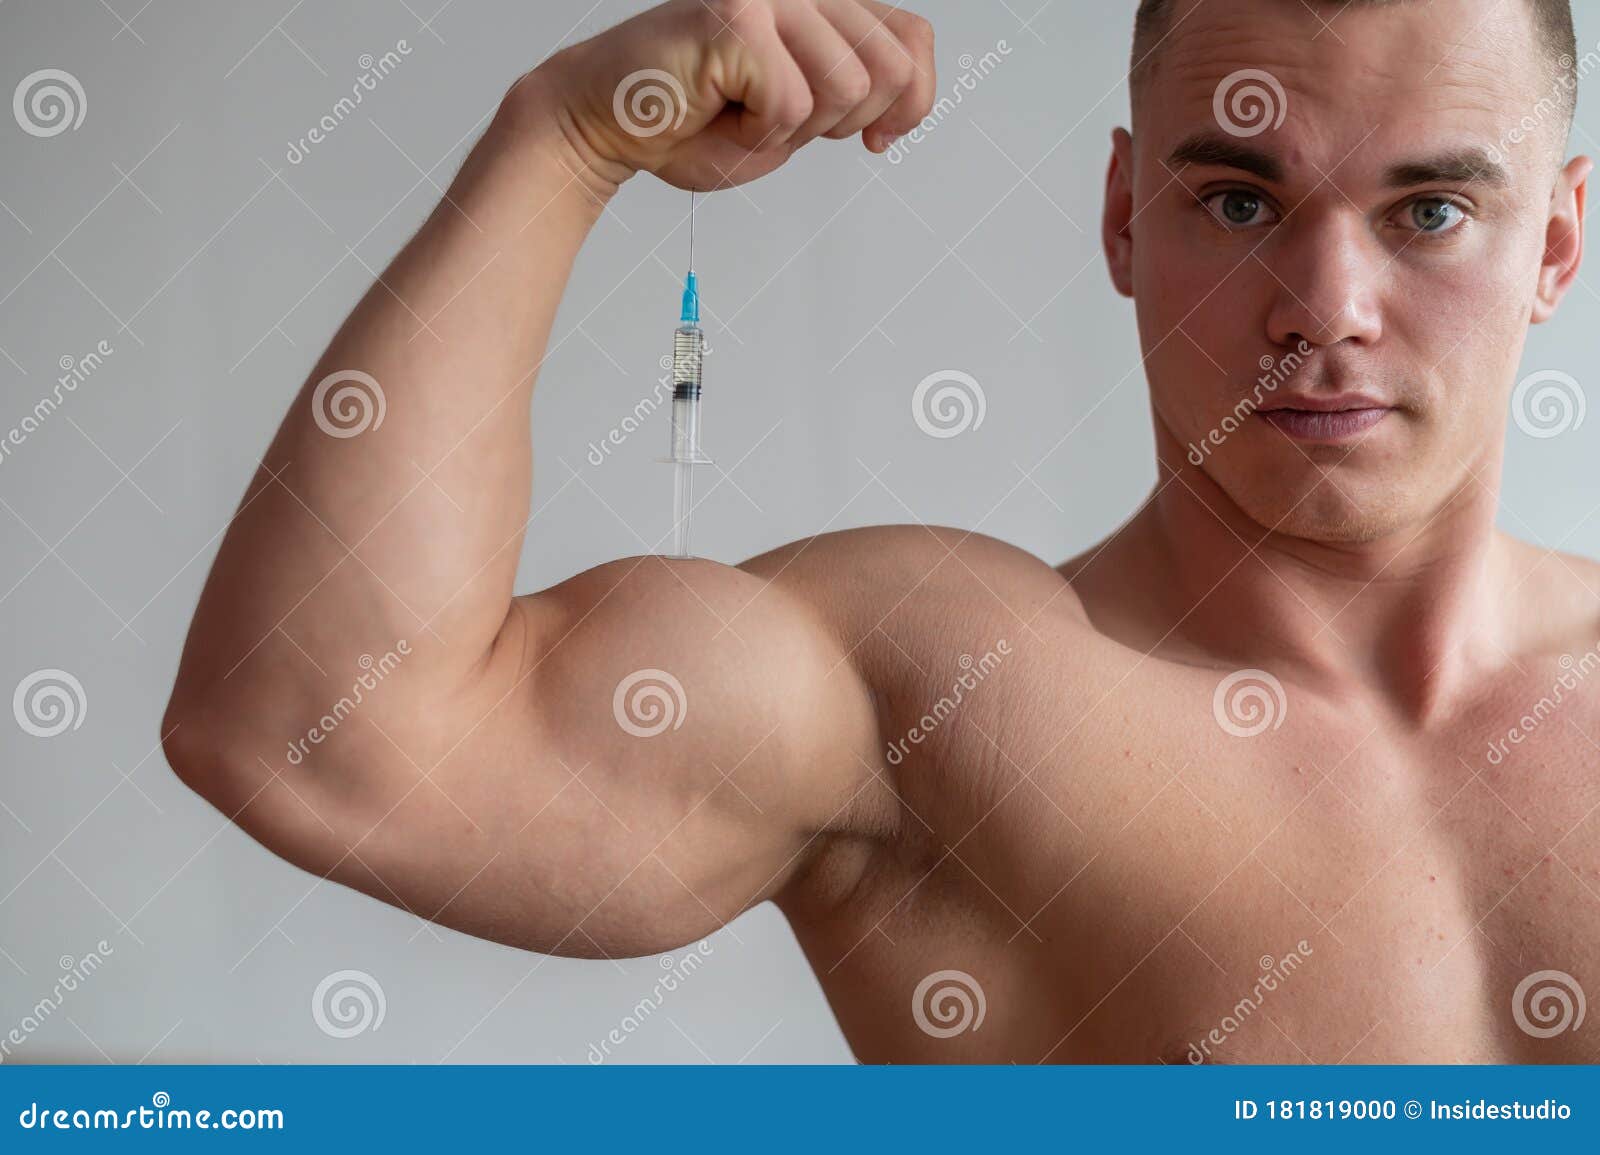 3 Short Stories You Didn't Know About buy anabolic steroids uk online